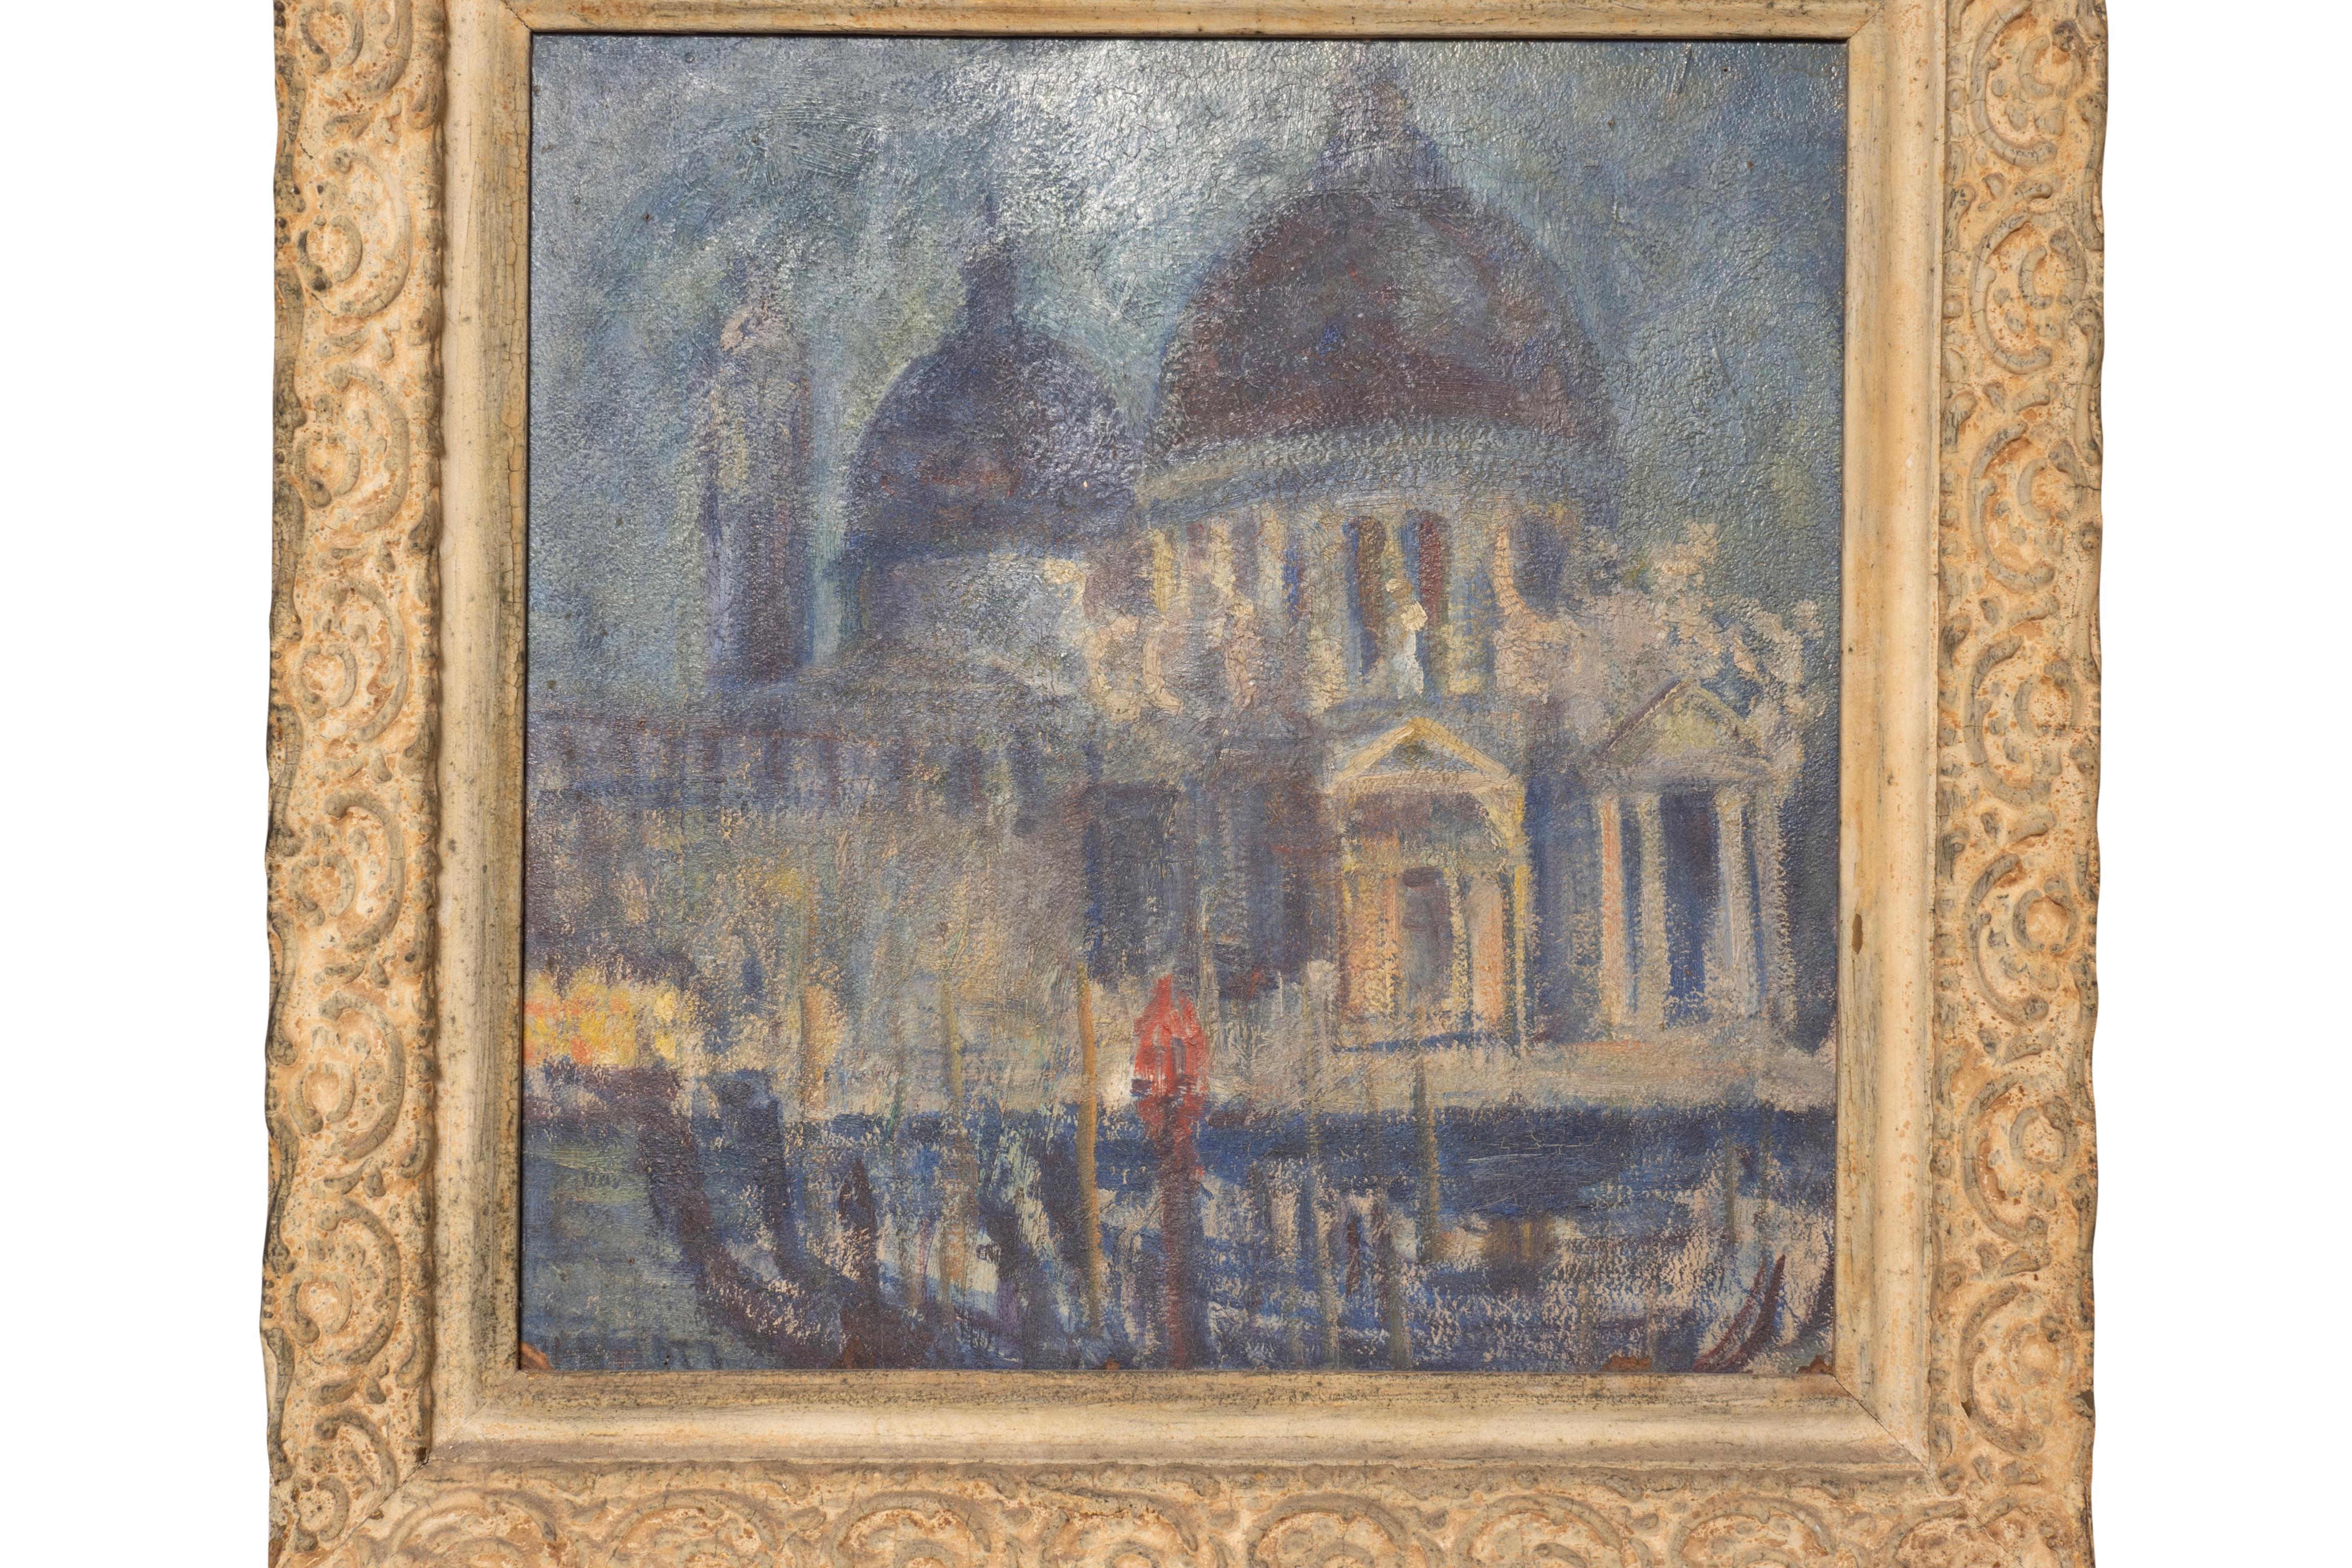 Depicting the famous church on the Grand Canal.Abstractly done showing the building and water with the gondolas. Not signed but an interesting painting. Molded off white painted frame.